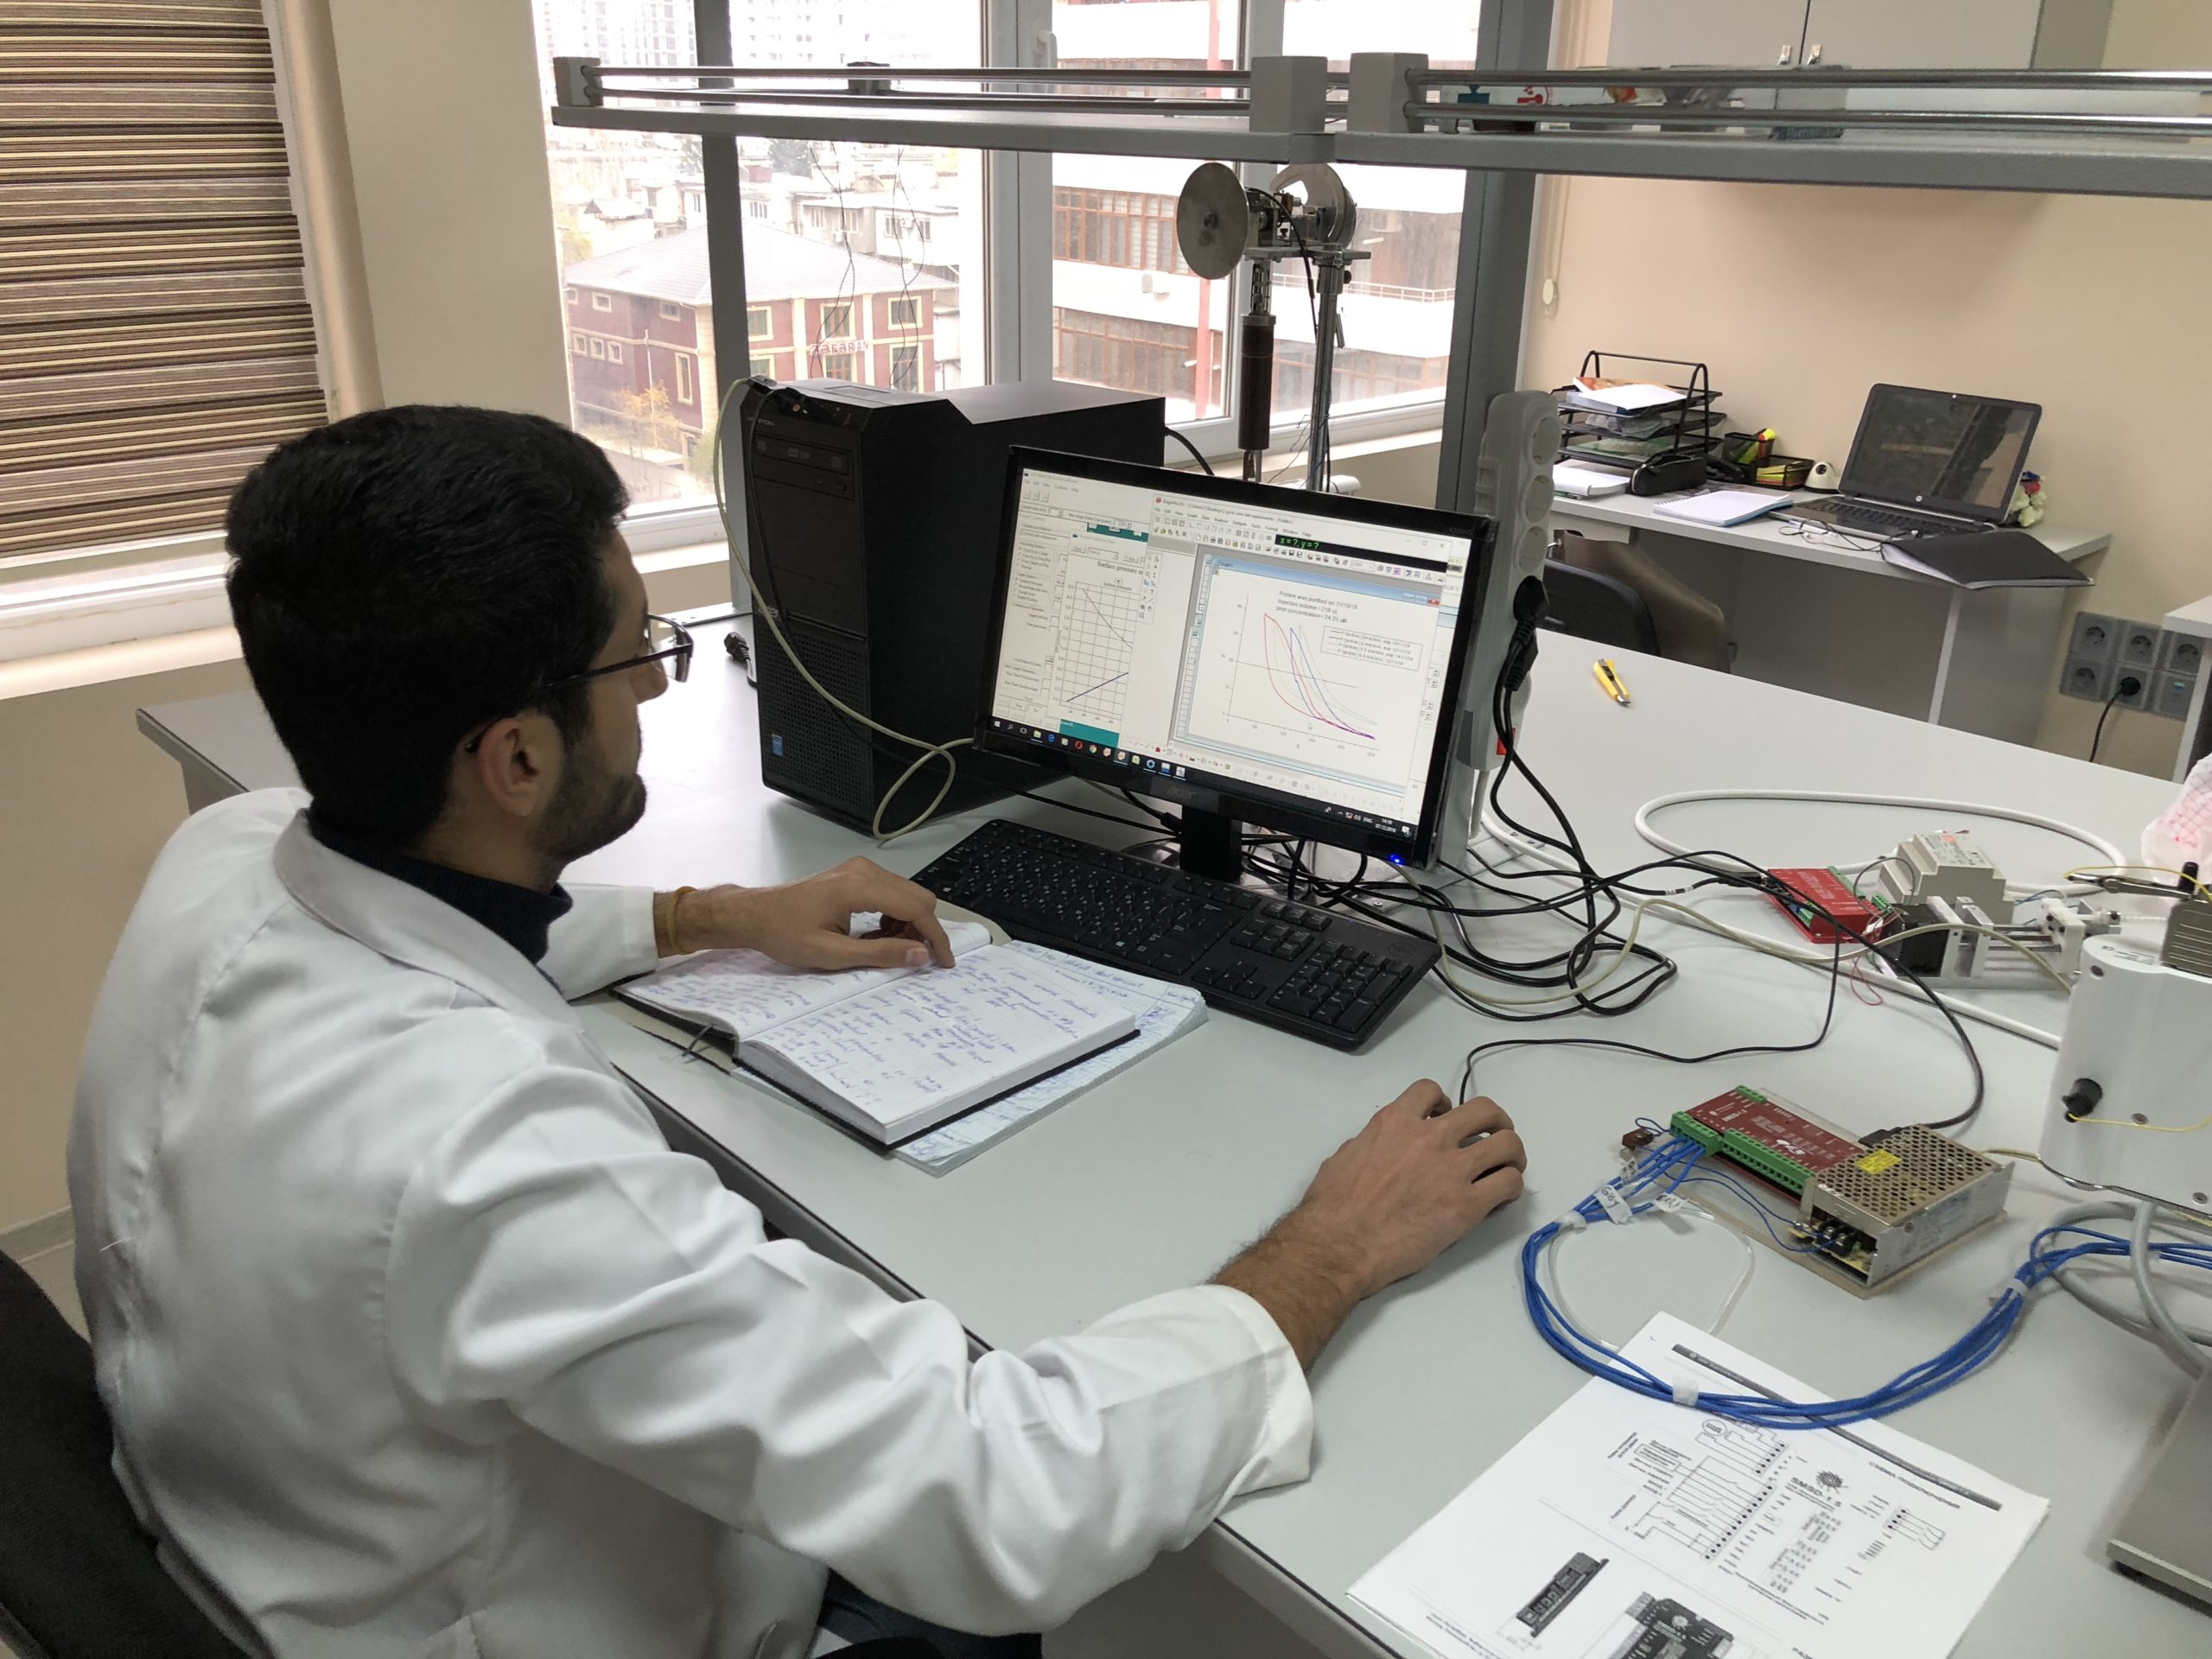 At the Institute of Biophysics of ANAS research works are carried out on new laboratory equipments